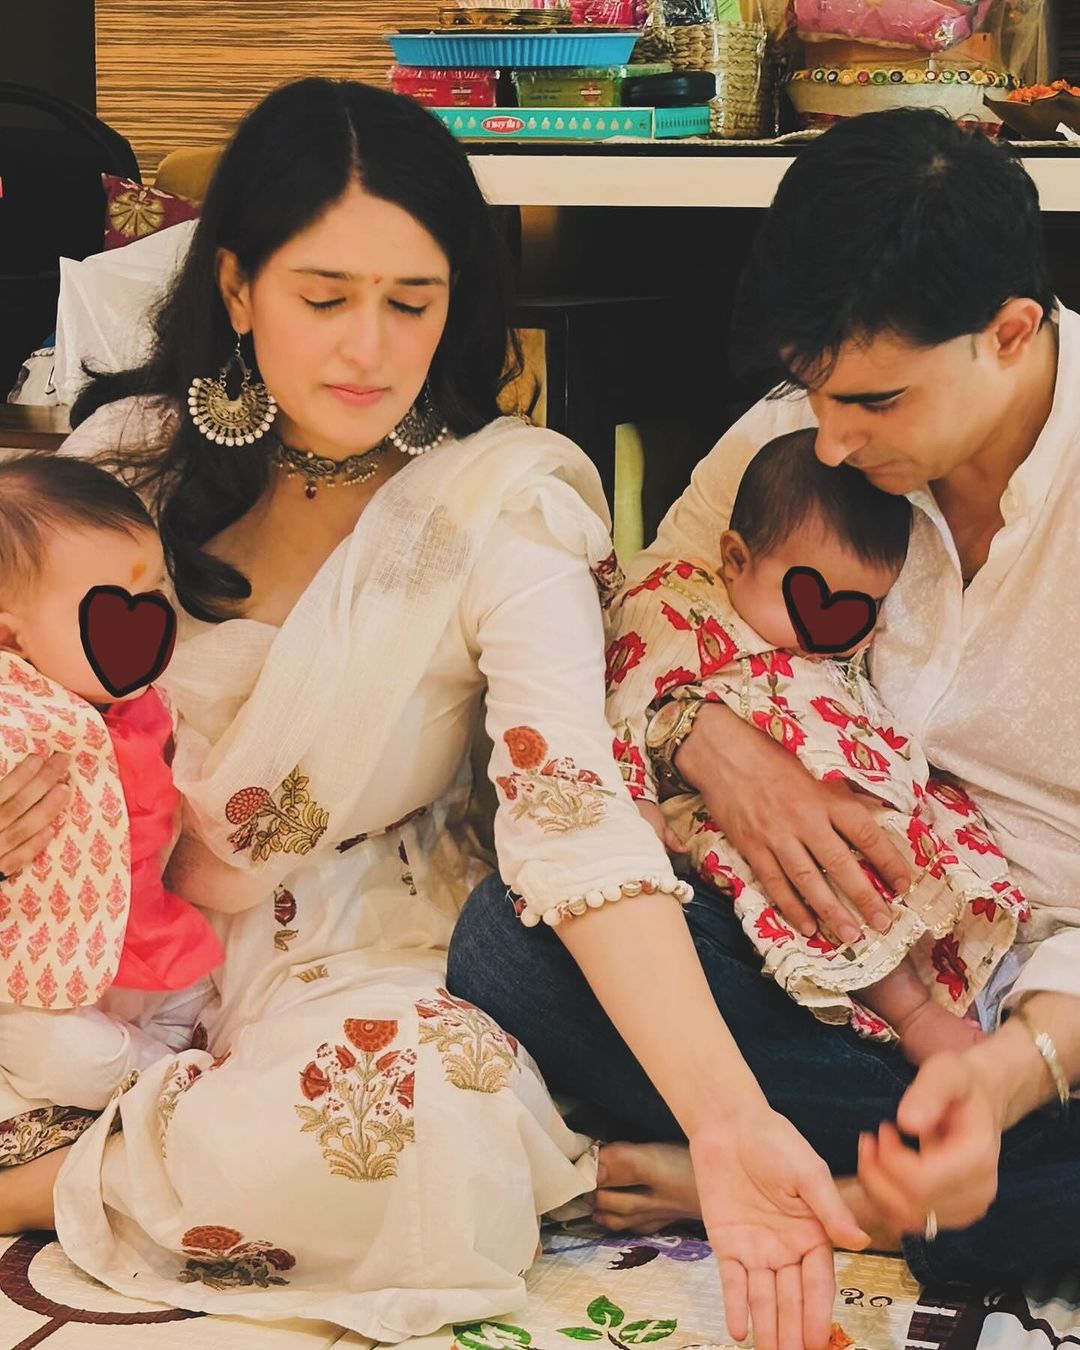 Most Loved Couple Gautam Rode And Pankhuri Awasthy Celebrated Their Twin Babies Rice Eating Ceremony. They Shared Glimpse Of It.